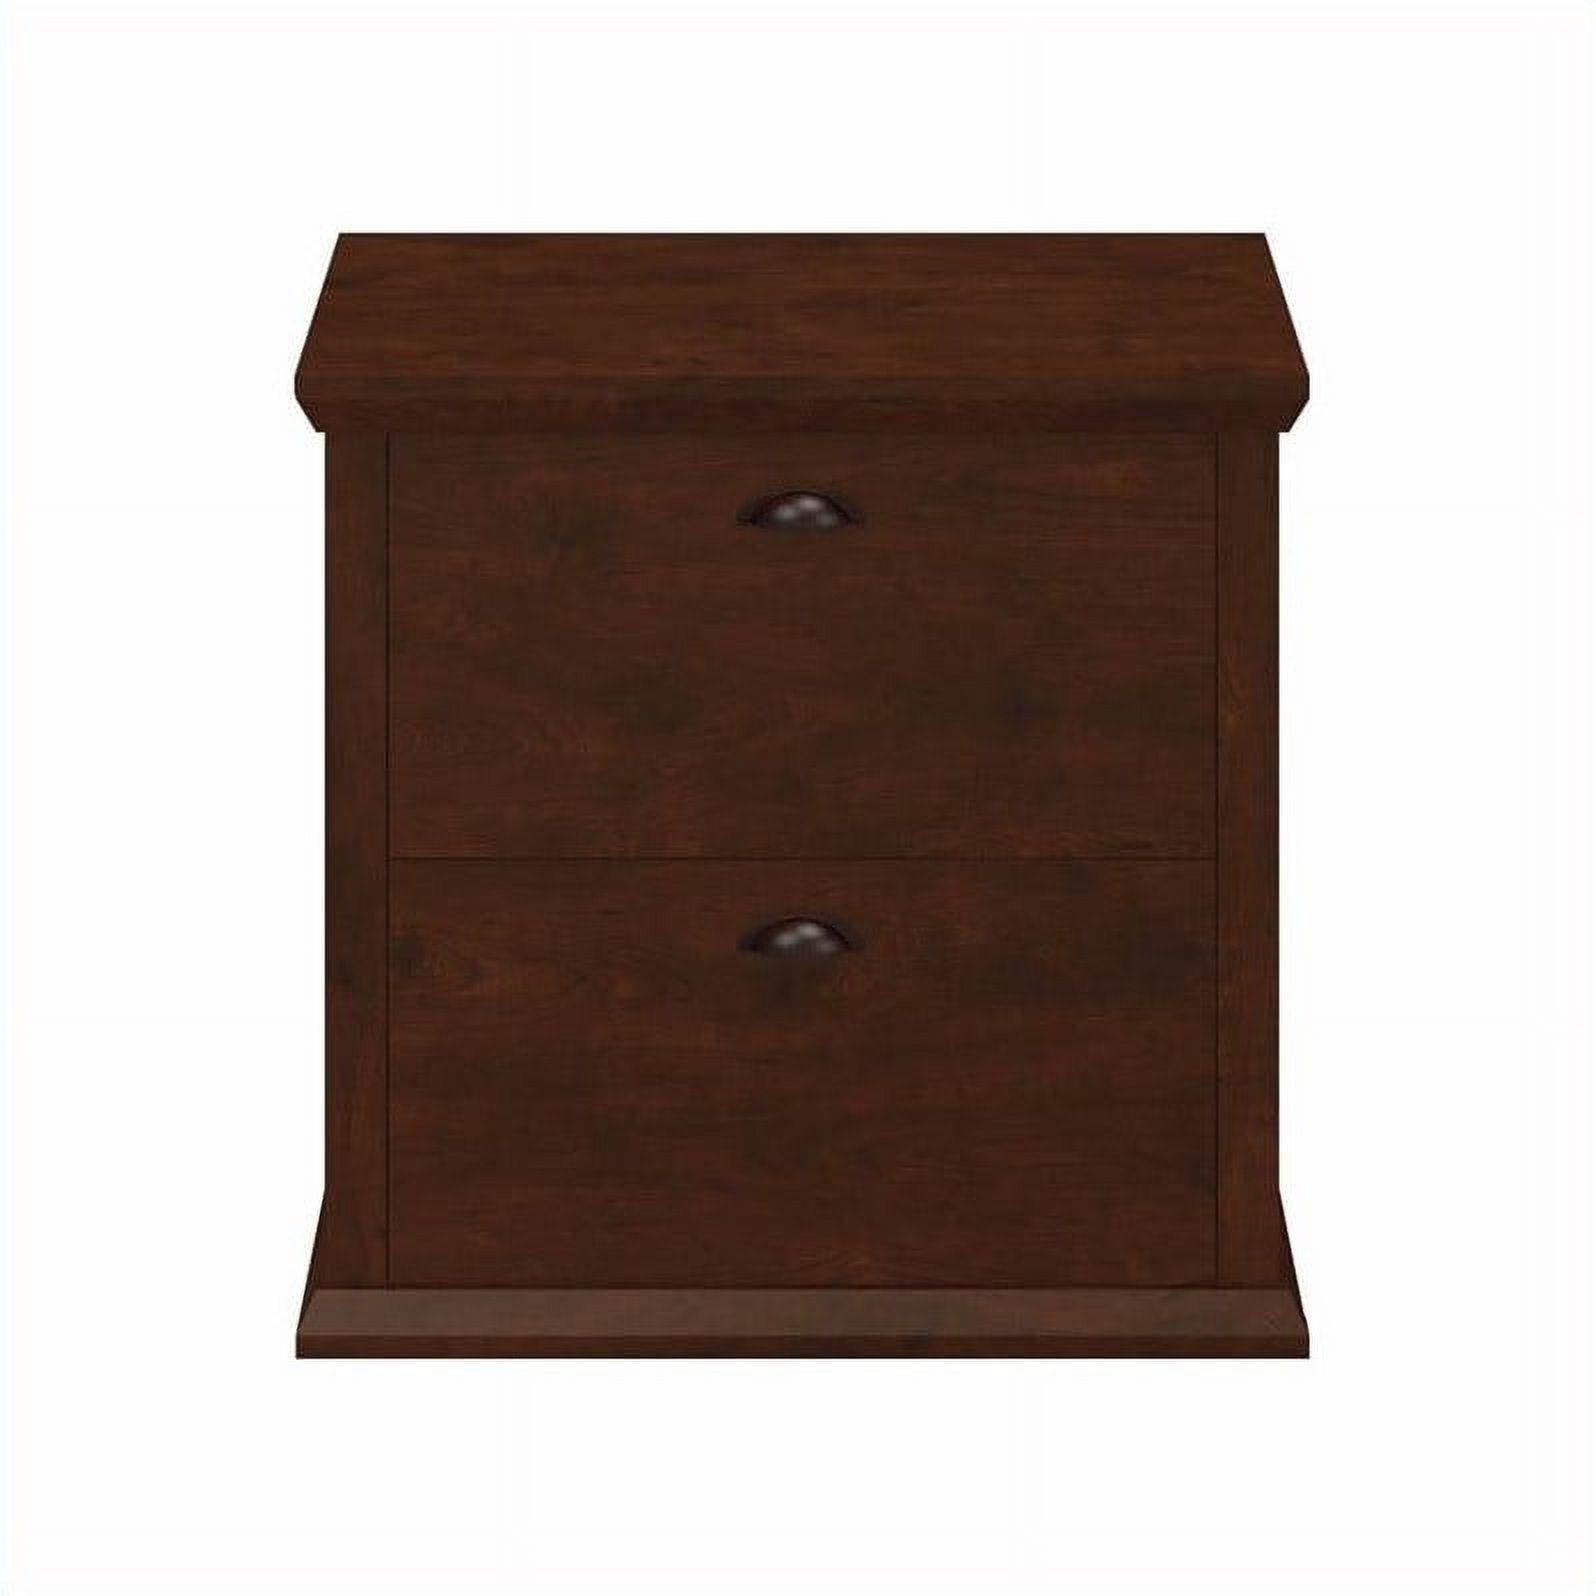 Scranton & Co 2 Drawer Lateral File Cabinet in Antique Cherry - image 3 of 5